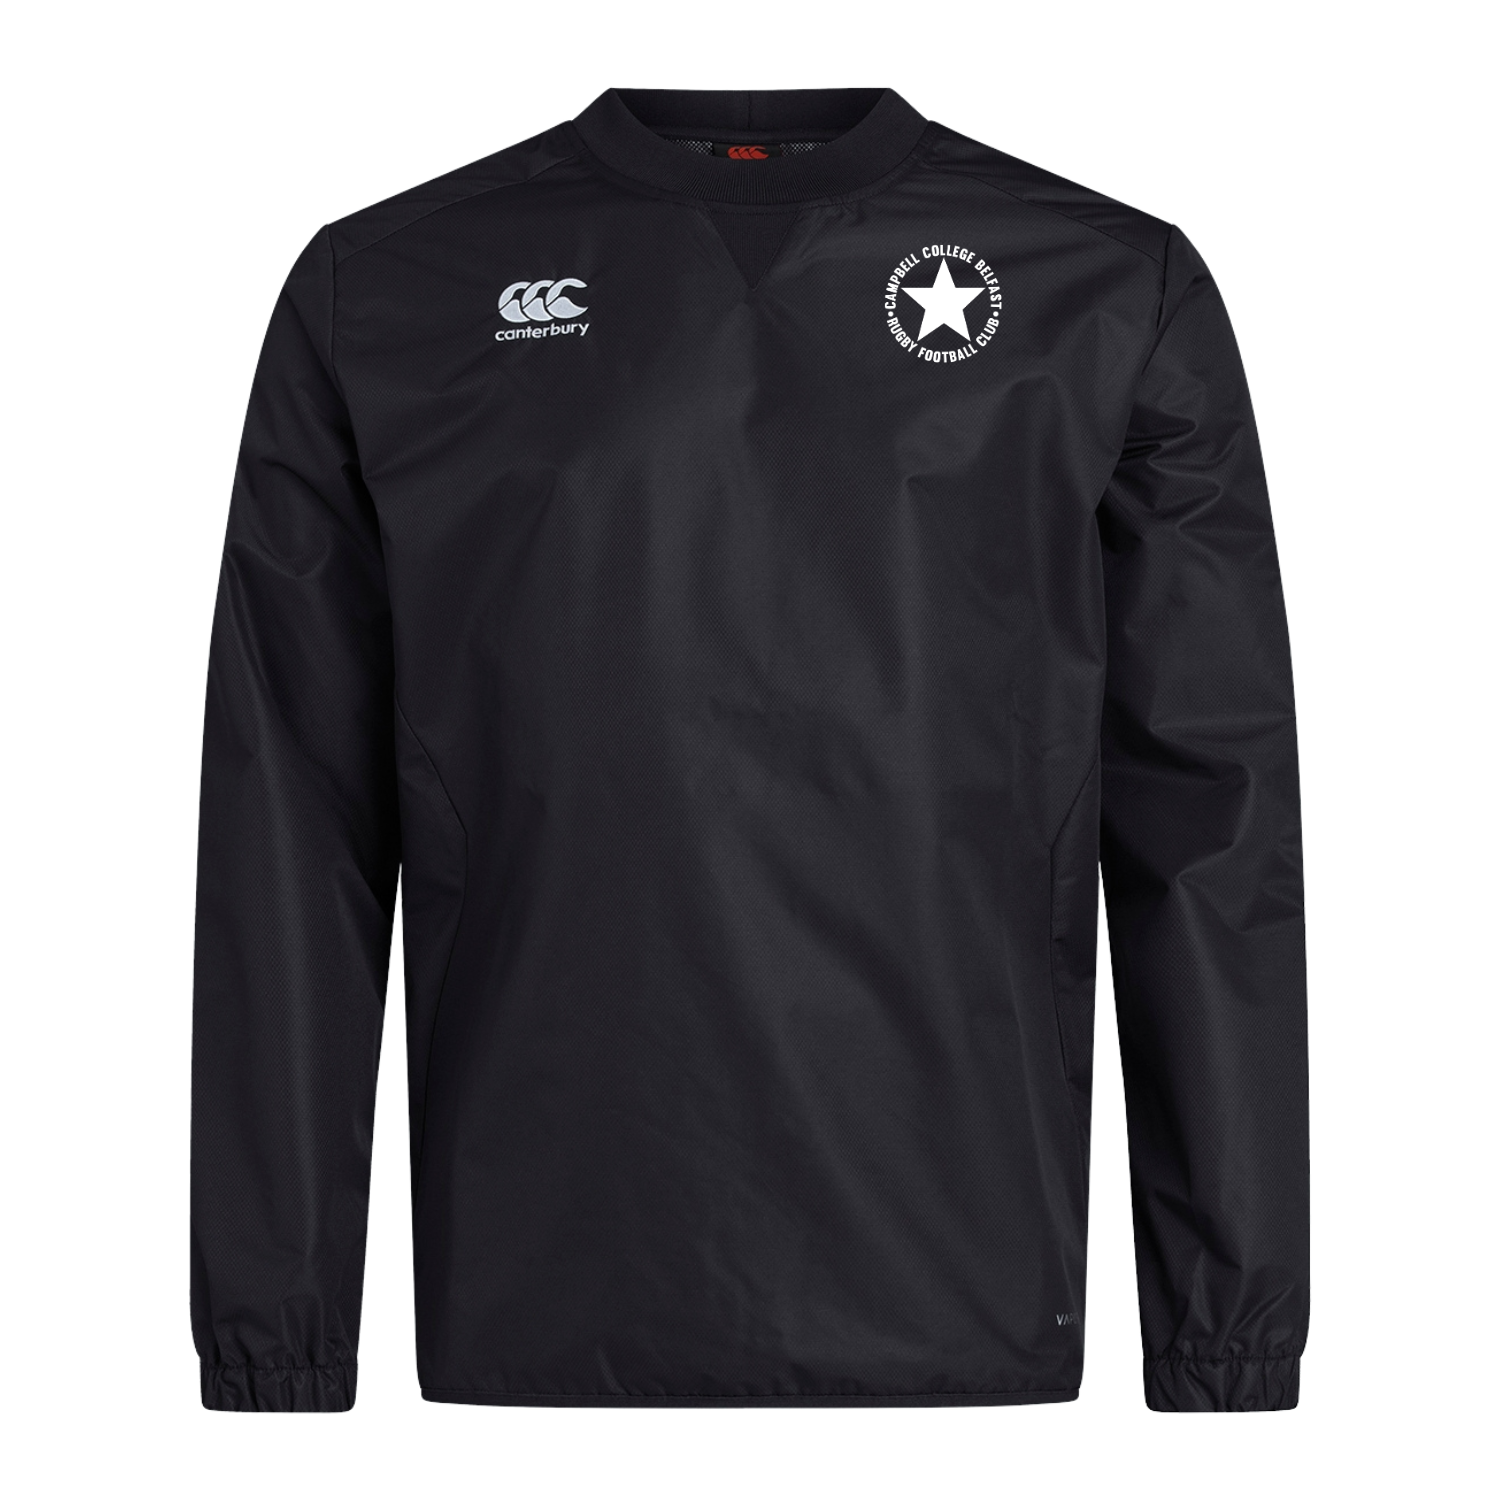 Campbell College - Club Senior Rugby Contact Top